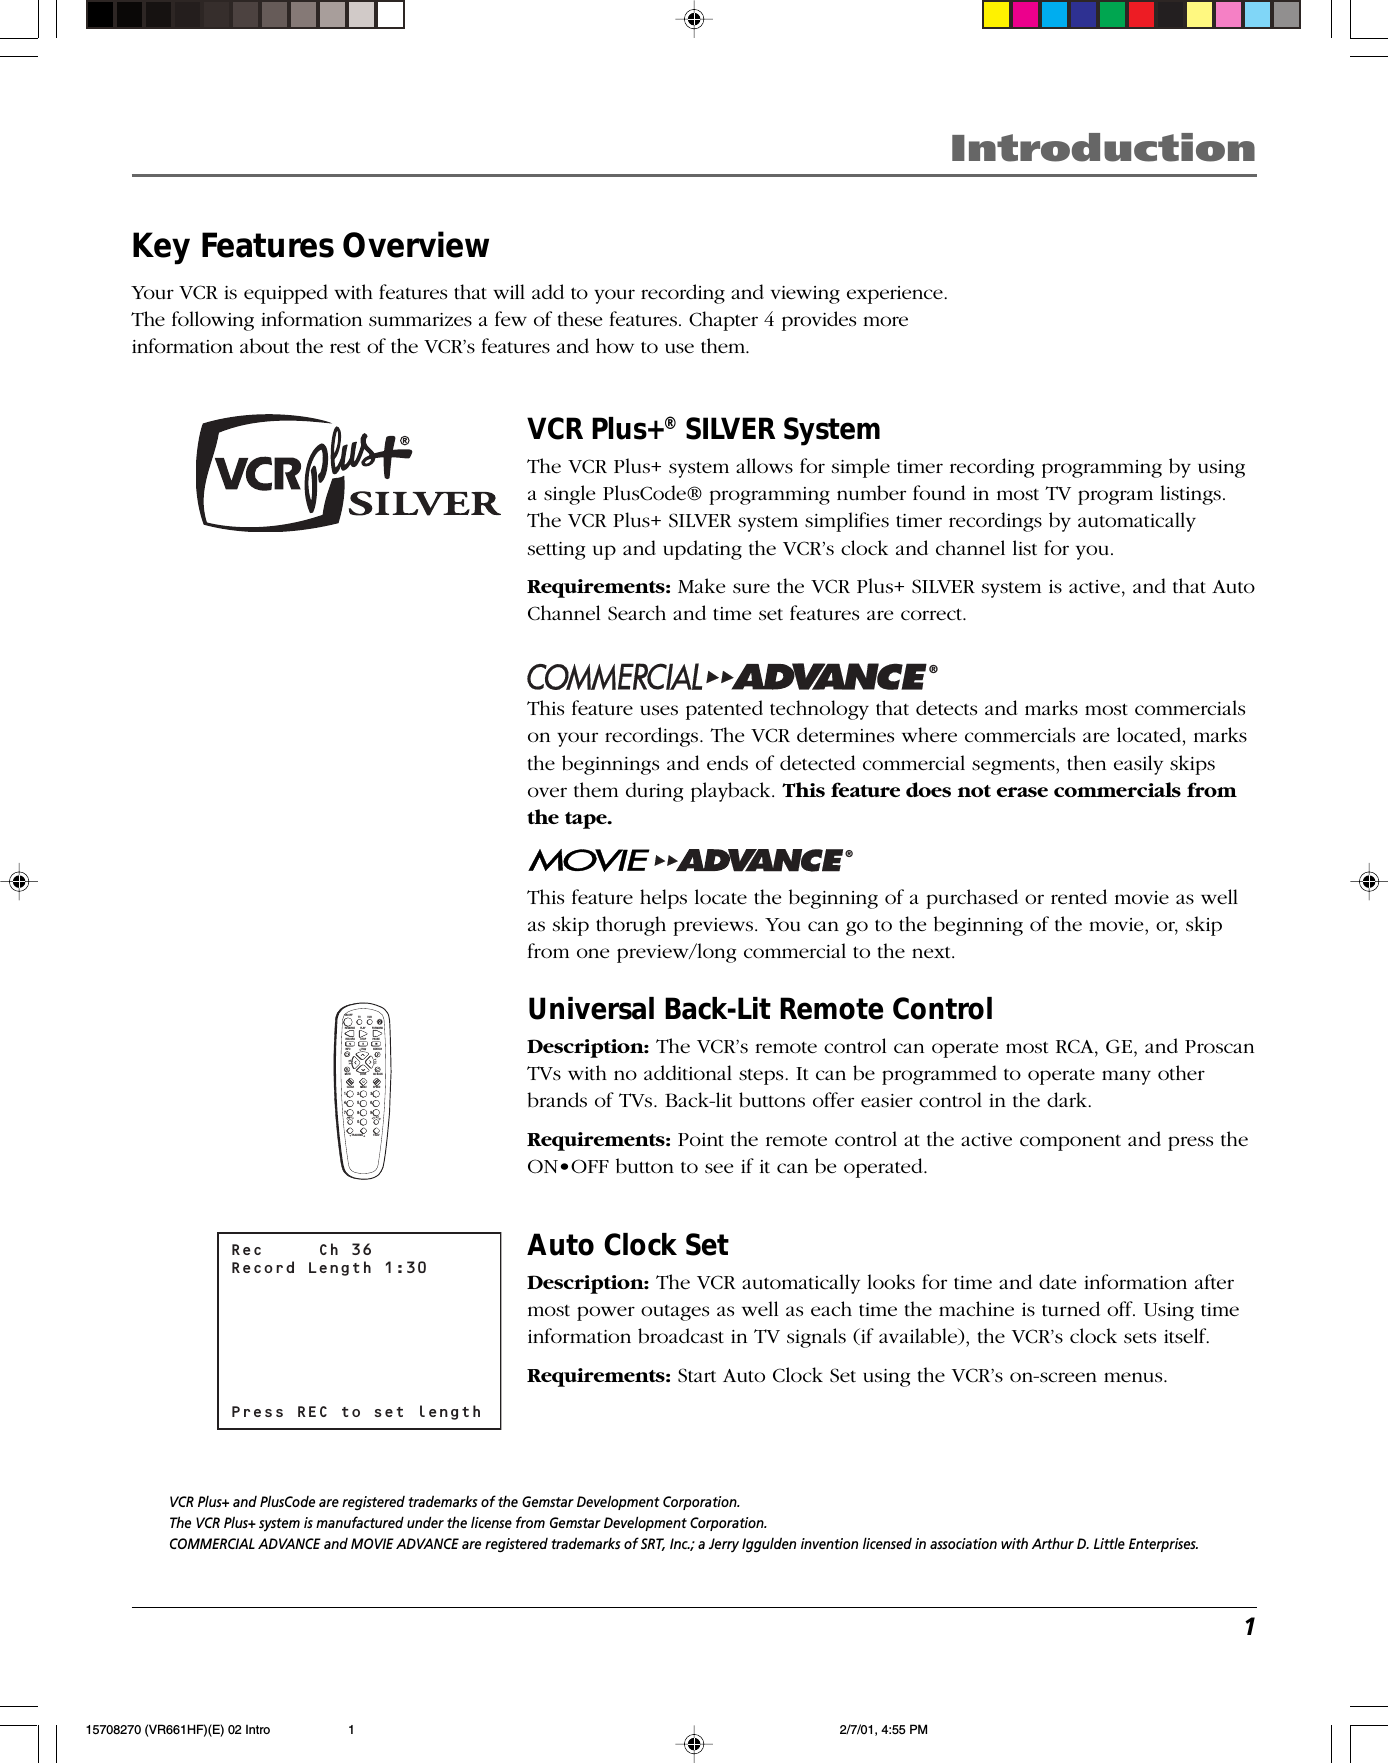 1IntroductionIntroductionKey Features OverviewYour VCR is equipped with features that will add to your recording and viewing experience.The following information summarizes a few of these features. Chapter 4 provides moreinformation about the rest of the VCR’s features and how to use them.INPUTTV•VCRON•OFFPLAY FORWARDRECORD STOP PAUSEF.ADVCLEAR MENU SPEEDTRACKING1472583690CHANVOLVOLCHANINFO SEARCHMUTE GO BACK TV VCRREVERSERec     Ch 36Record Length 1:30Press REC to set lengthVCR Plus+® SILVER SystemThe VCR Plus+ system allows for simple timer recording programming by usinga single PlusCode® programming number found in most TV program listings.The VCR Plus+ SILVER system simplifies timer recordings by automaticallysetting up and updating the VCR’s clock and channel list for you.Requirements: Make sure the VCR Plus+ SILVER system is active, and that AutoChannel Search and time set features are correct.®This feature uses patented technology that detects and marks most commercialson your recordings. The VCR determines where commercials are located, marksthe beginnings and ends of detected commercial segments, then easily skipsover them during playback. This feature does not erase commercials fromthe tape.®This feature helps locate the beginning of a purchased or rented movie as wellas skip thorugh previews. You can go to the beginning of the movie, or, skipfrom one preview/long commercial to the next.Universal Back-Lit Remote ControlDescription: The VCR’s remote control can operate most RCA, GE, and ProscanTVs with no additional steps. It can be programmed to operate many otherbrands of TVs. Back-lit buttons offer easier control in the dark.Requirements: Point the remote control at the active component and press theON•OFF button to see if it can be operated.Auto Clock SetDescription: The VCR automatically looks for time and date information aftermost power outages as well as each time the machine is turned off. Using timeinformation broadcast in TV signals (if available), the VCR’s clock sets itself.Requirements: Start Auto Clock Set using the VCR’s on-screen menus.VCR Plus+ and PlusCode are registered trademarks of the Gemstar Development Corporation.The VCR Plus+ system is manufactured under the license from Gemstar Development Corporation.COMMERCIAL ADVANCE and MOVIE ADVANCE are registered trademarks of SRT, Inc.; a Jerry Iggulden invention licensed in association with Arthur D. Little Enterprises.15708270 (VR661HF)(E) 02 Intro 2/7/01, 4:55 PM1